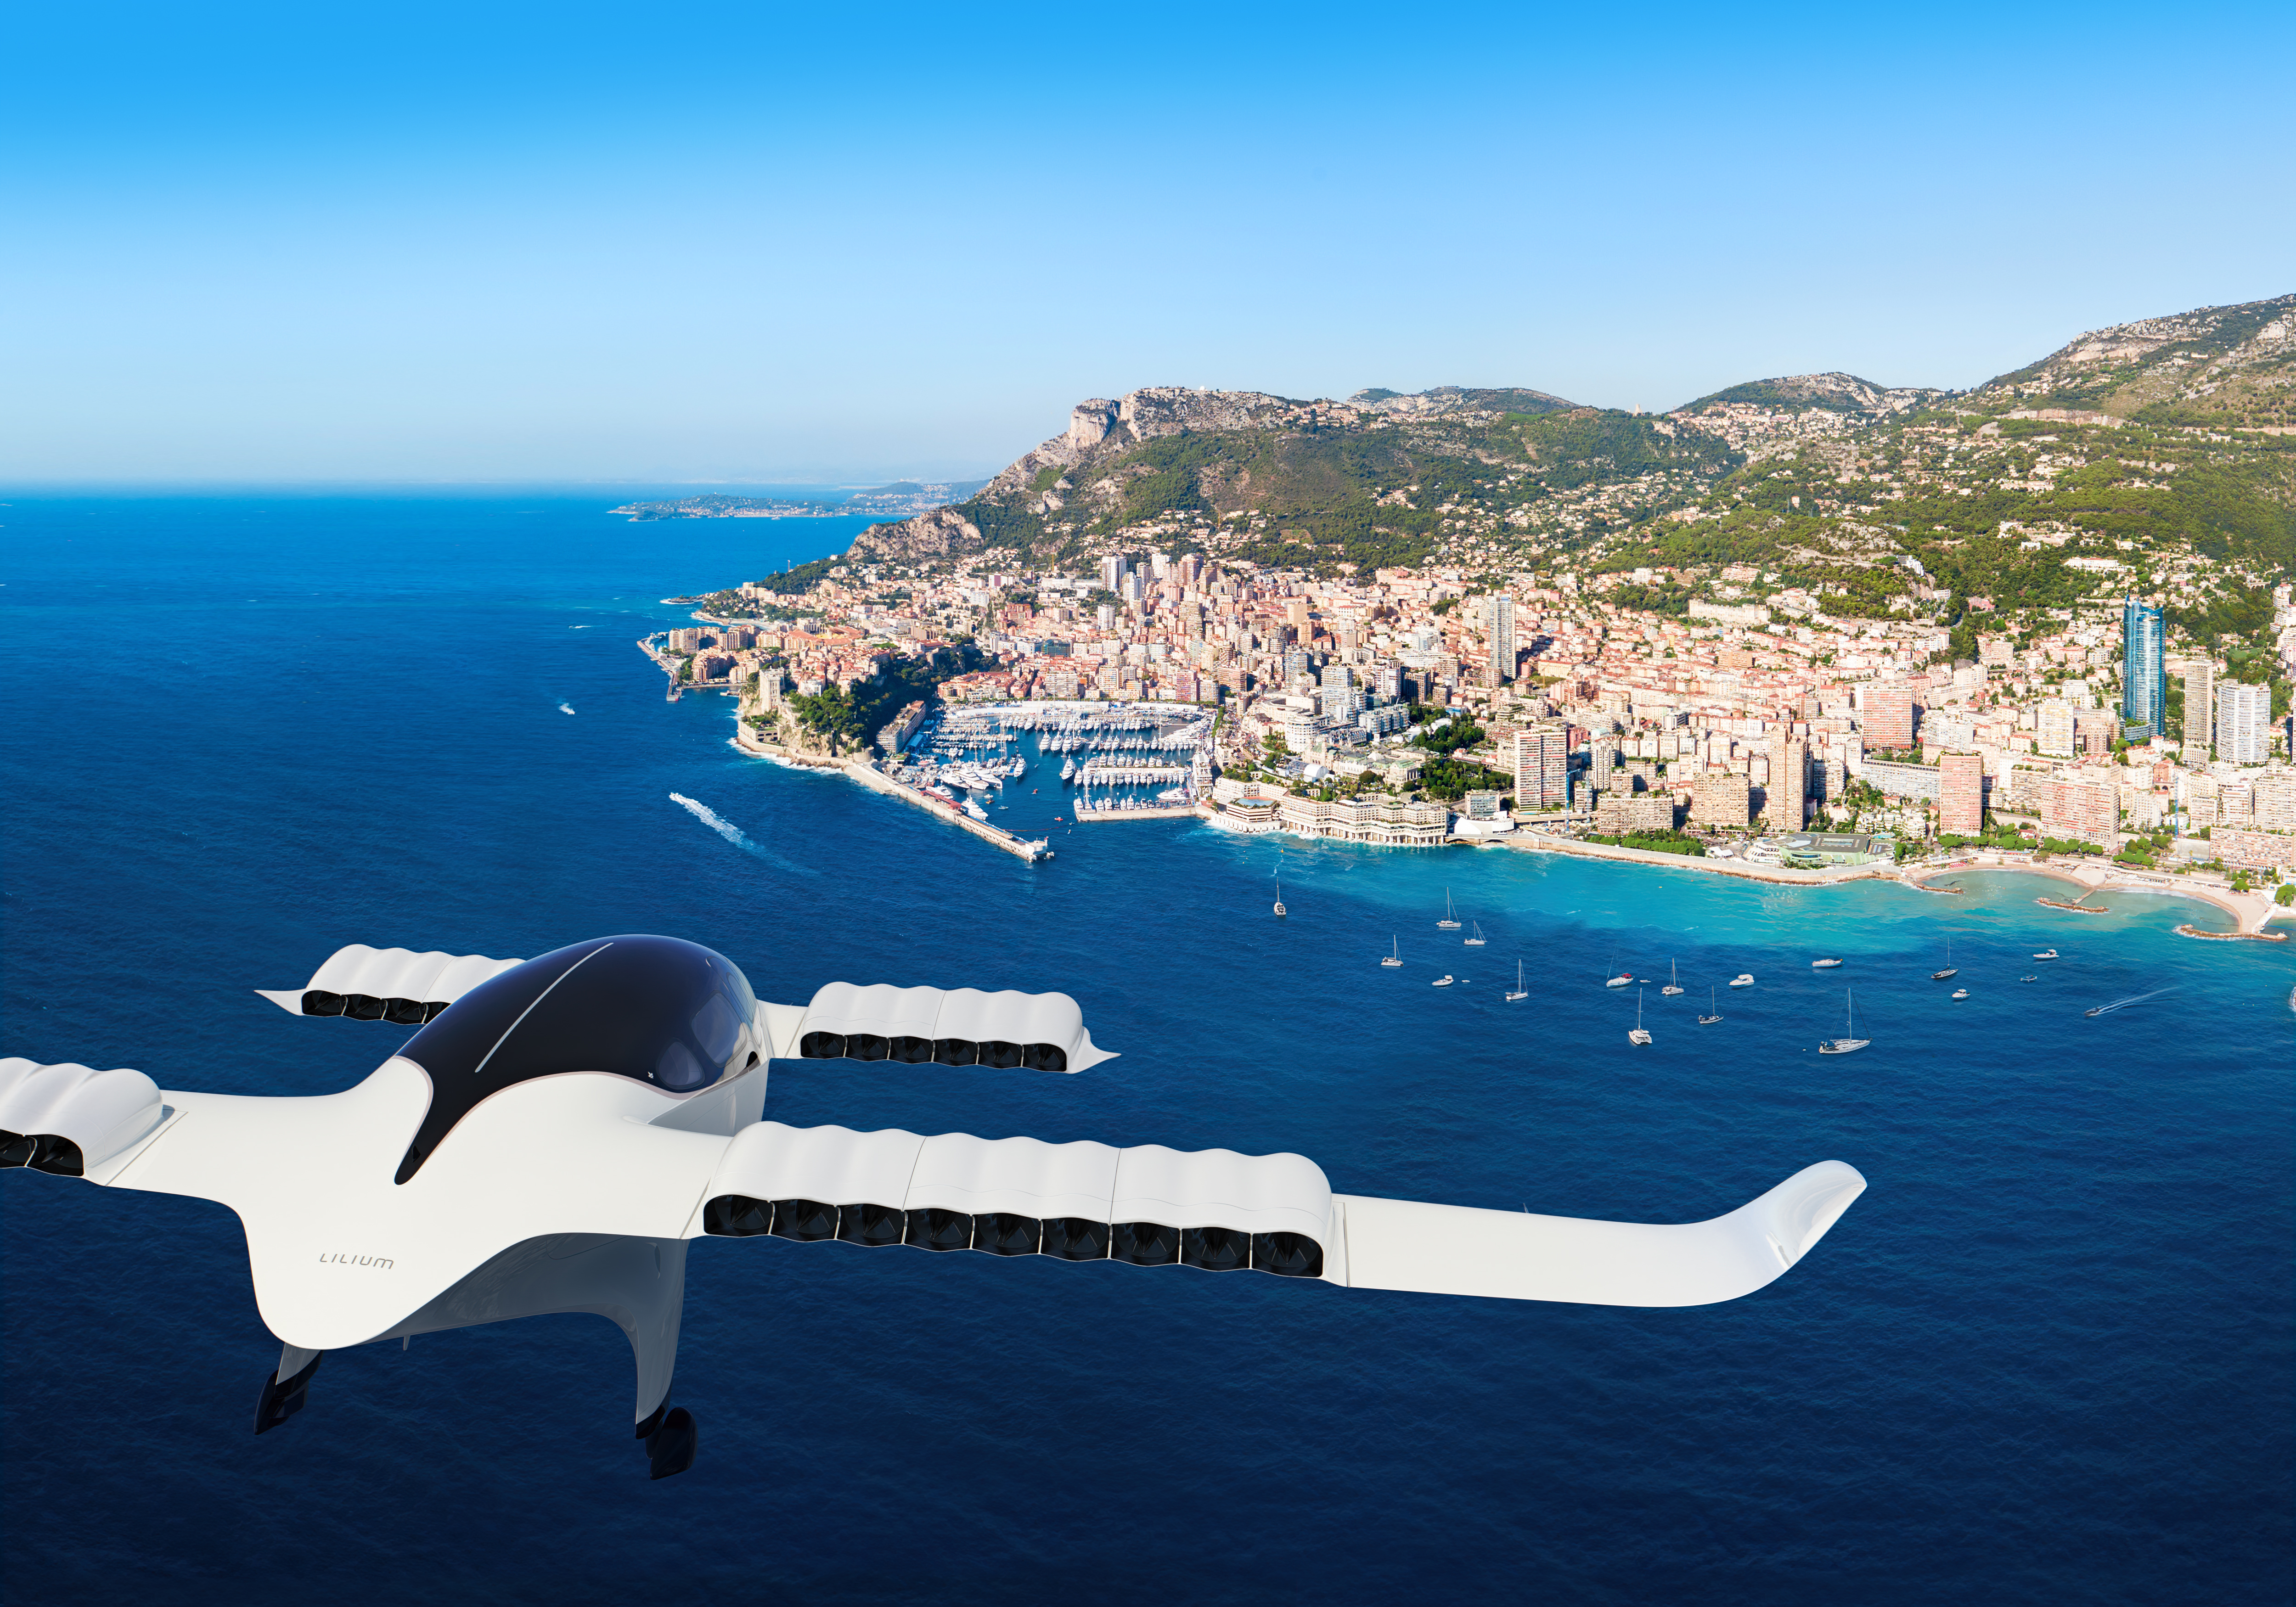 GlobeAir to serve Southern France and Italy with the Lilium Jet 